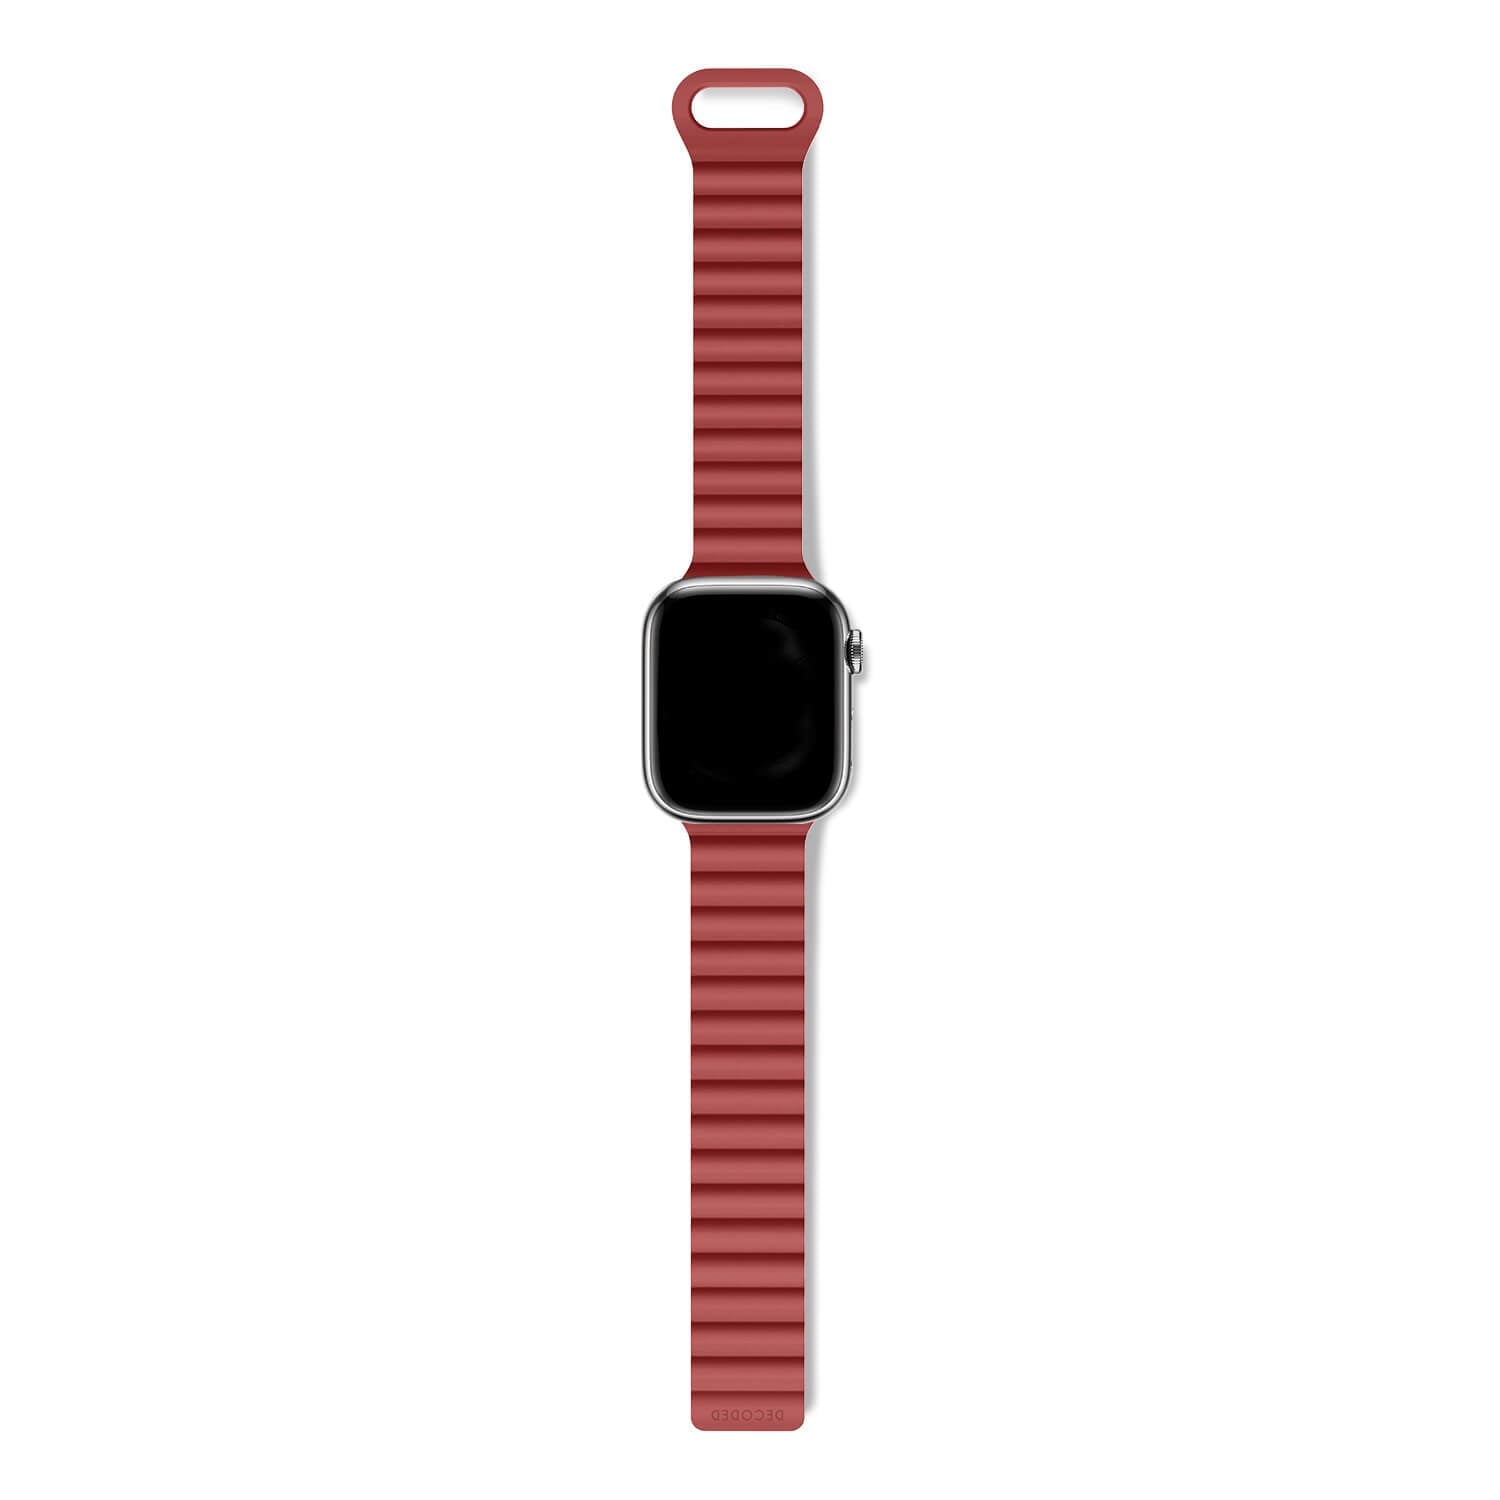 Silicone Traction Loop Strap Apple Watch 38mm Astro Dust